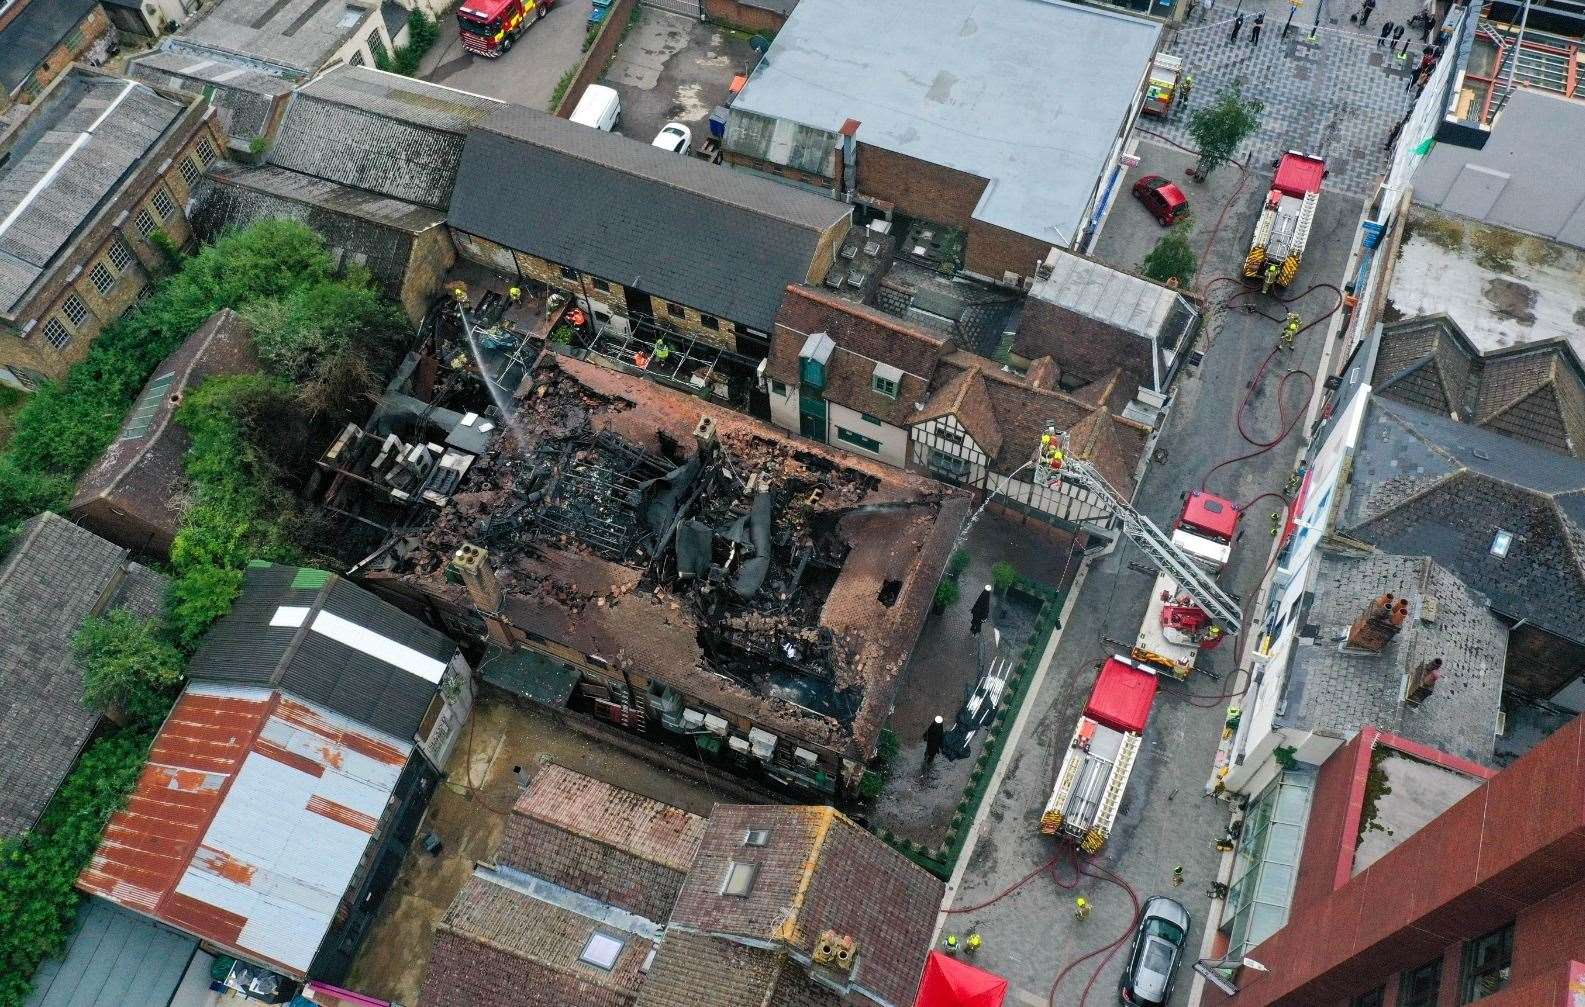 15 fire engines were at the scene at its height. Pictures: UKNiP